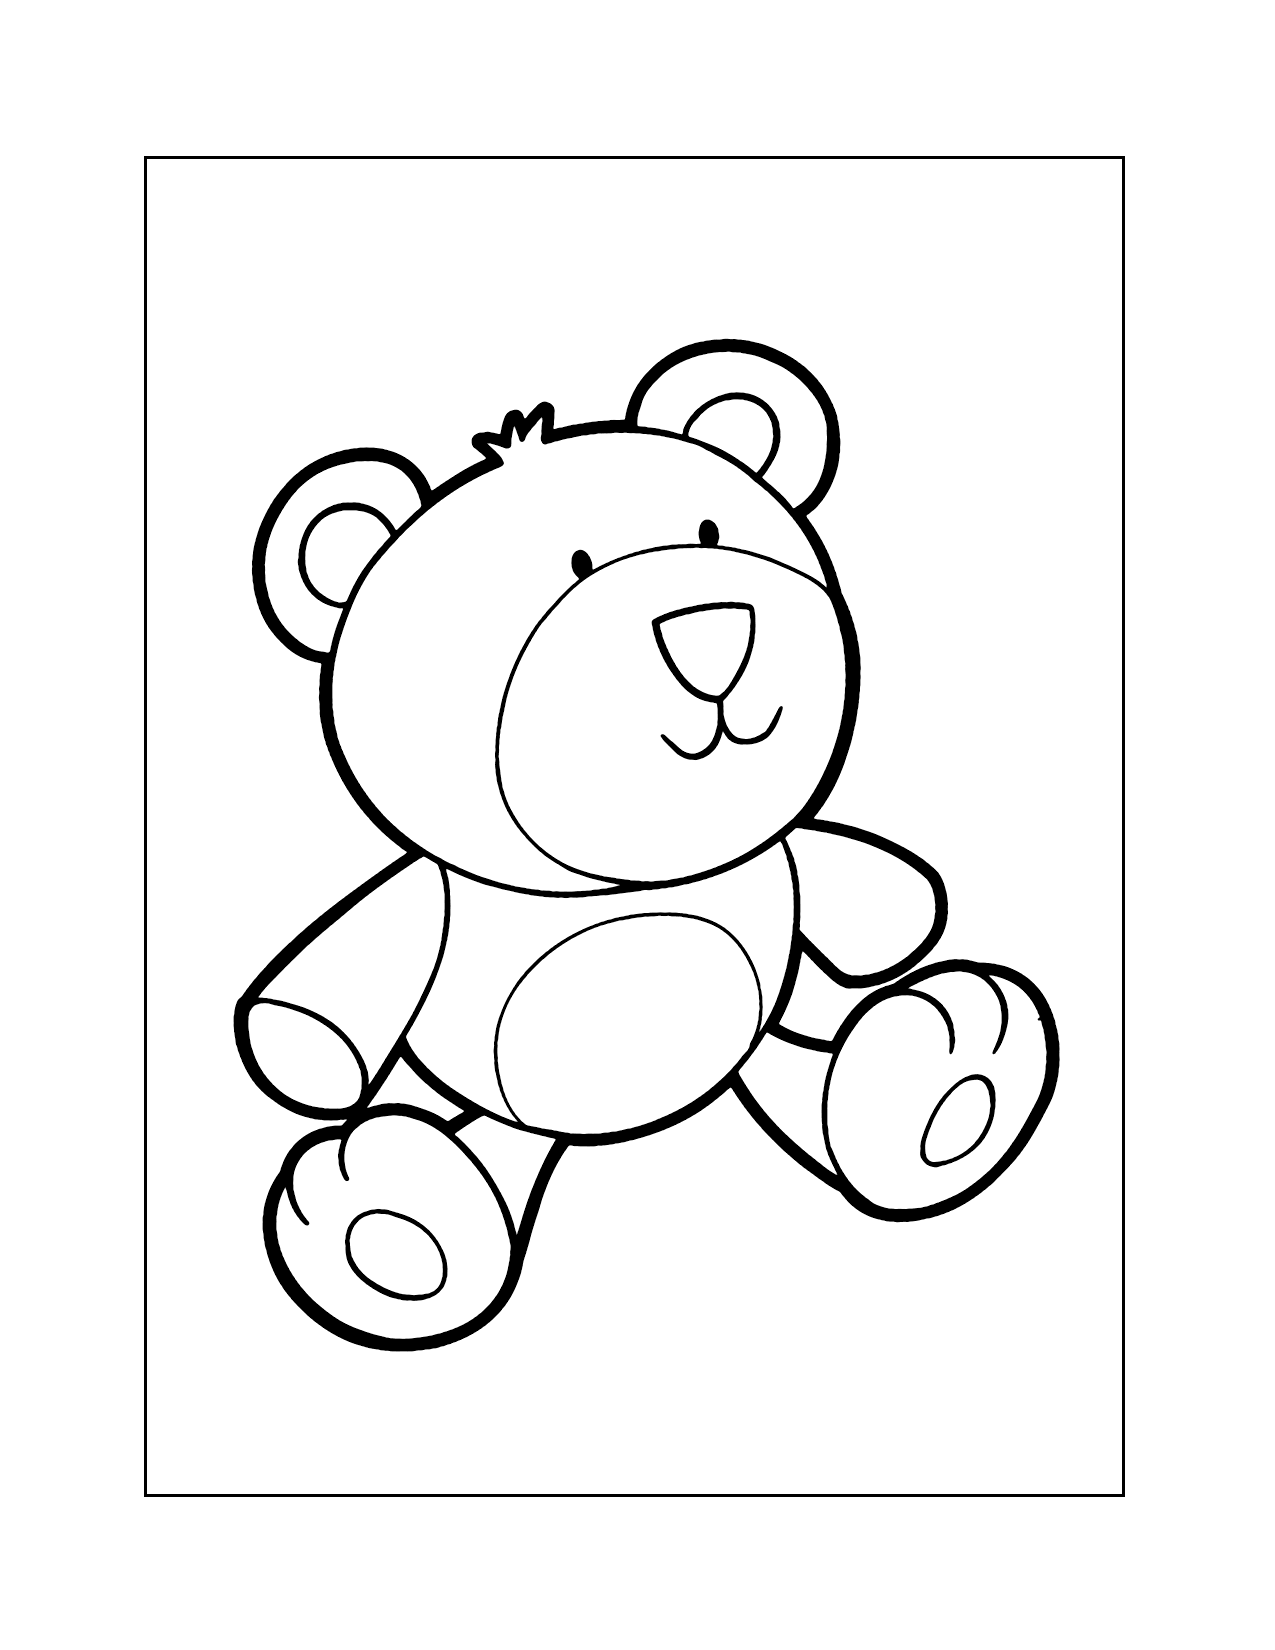 Teddy Bear Doll Coloring Page